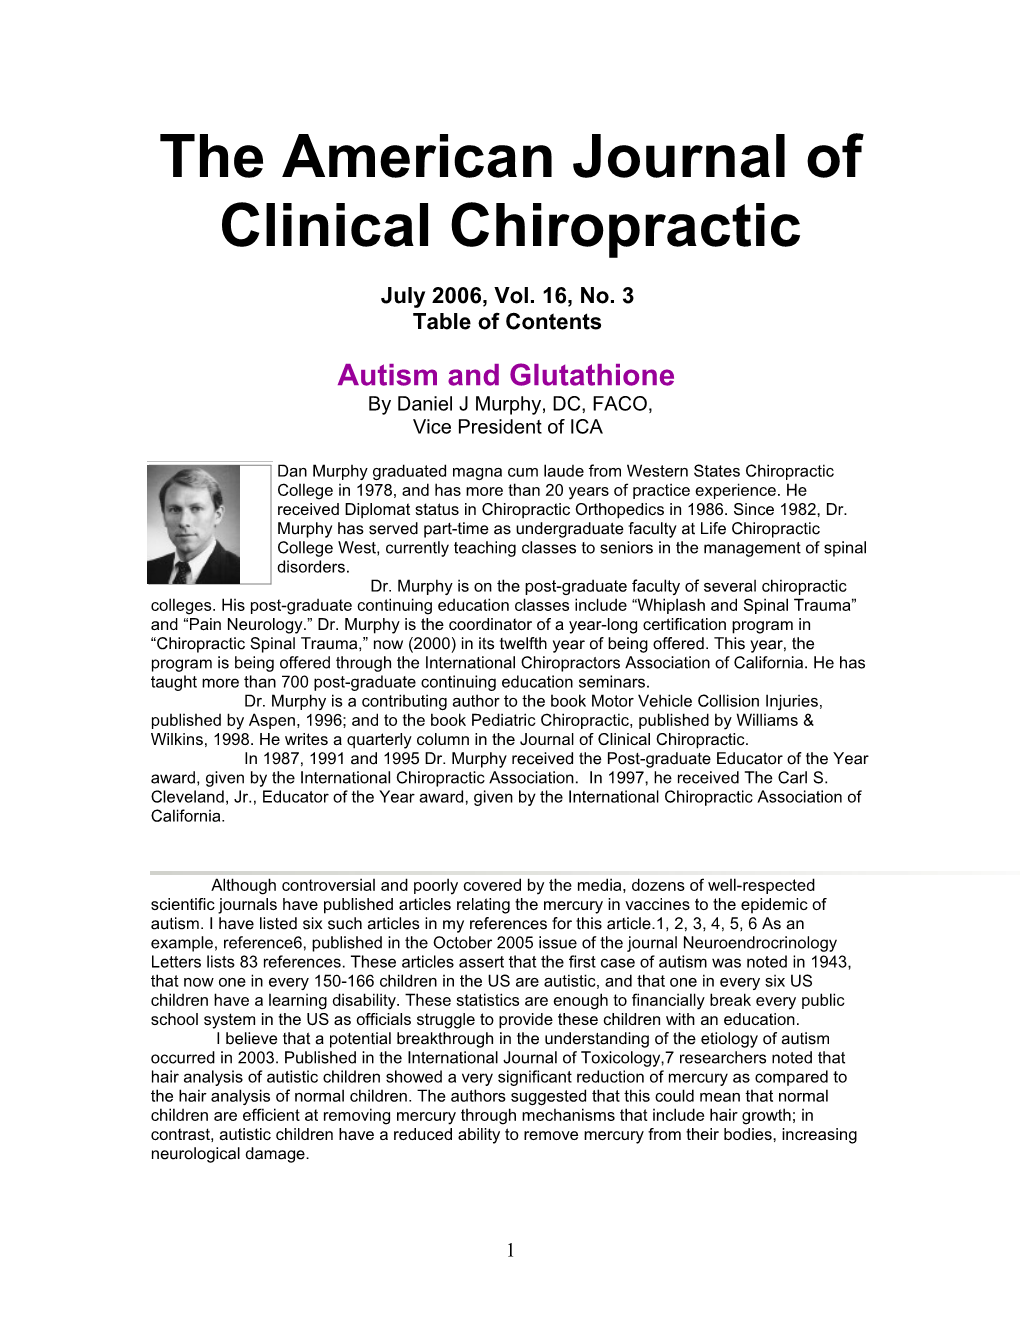 The American Journal of Clinical Chiropractic